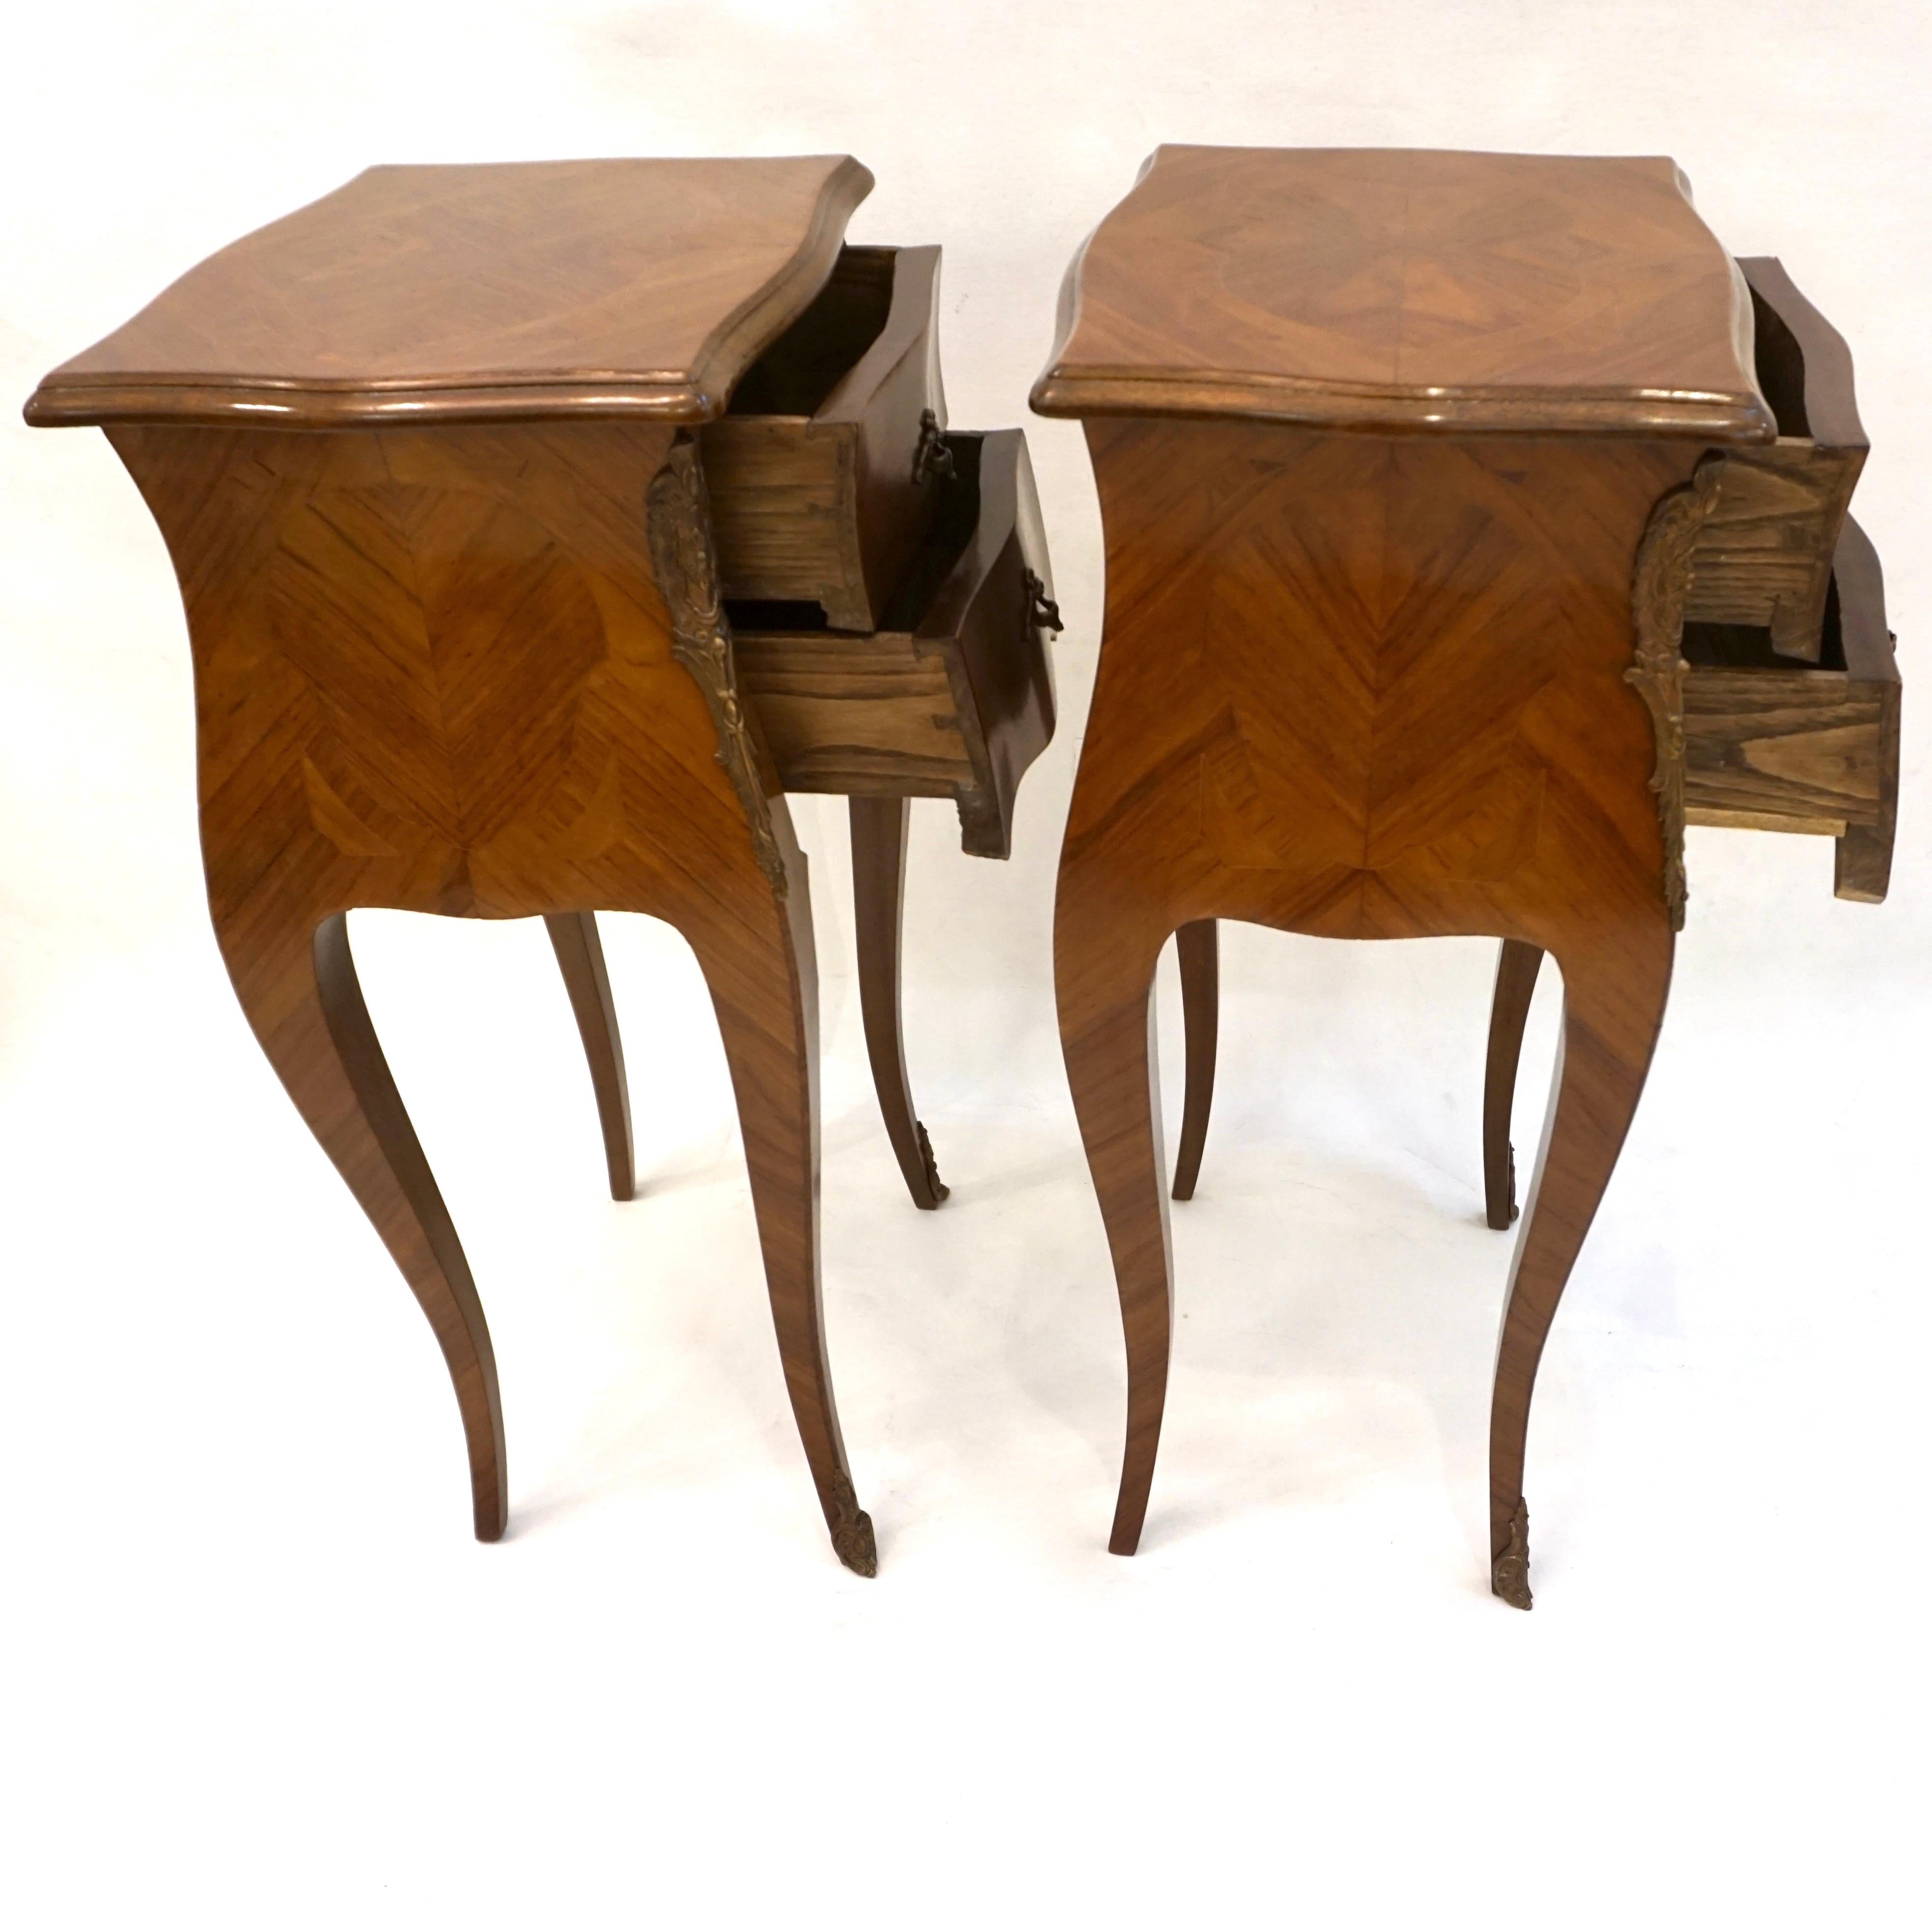 1940 French Louis XV Revival Pair of Inlaid Rosewood Walnut 2-Drawer Side Tables 10